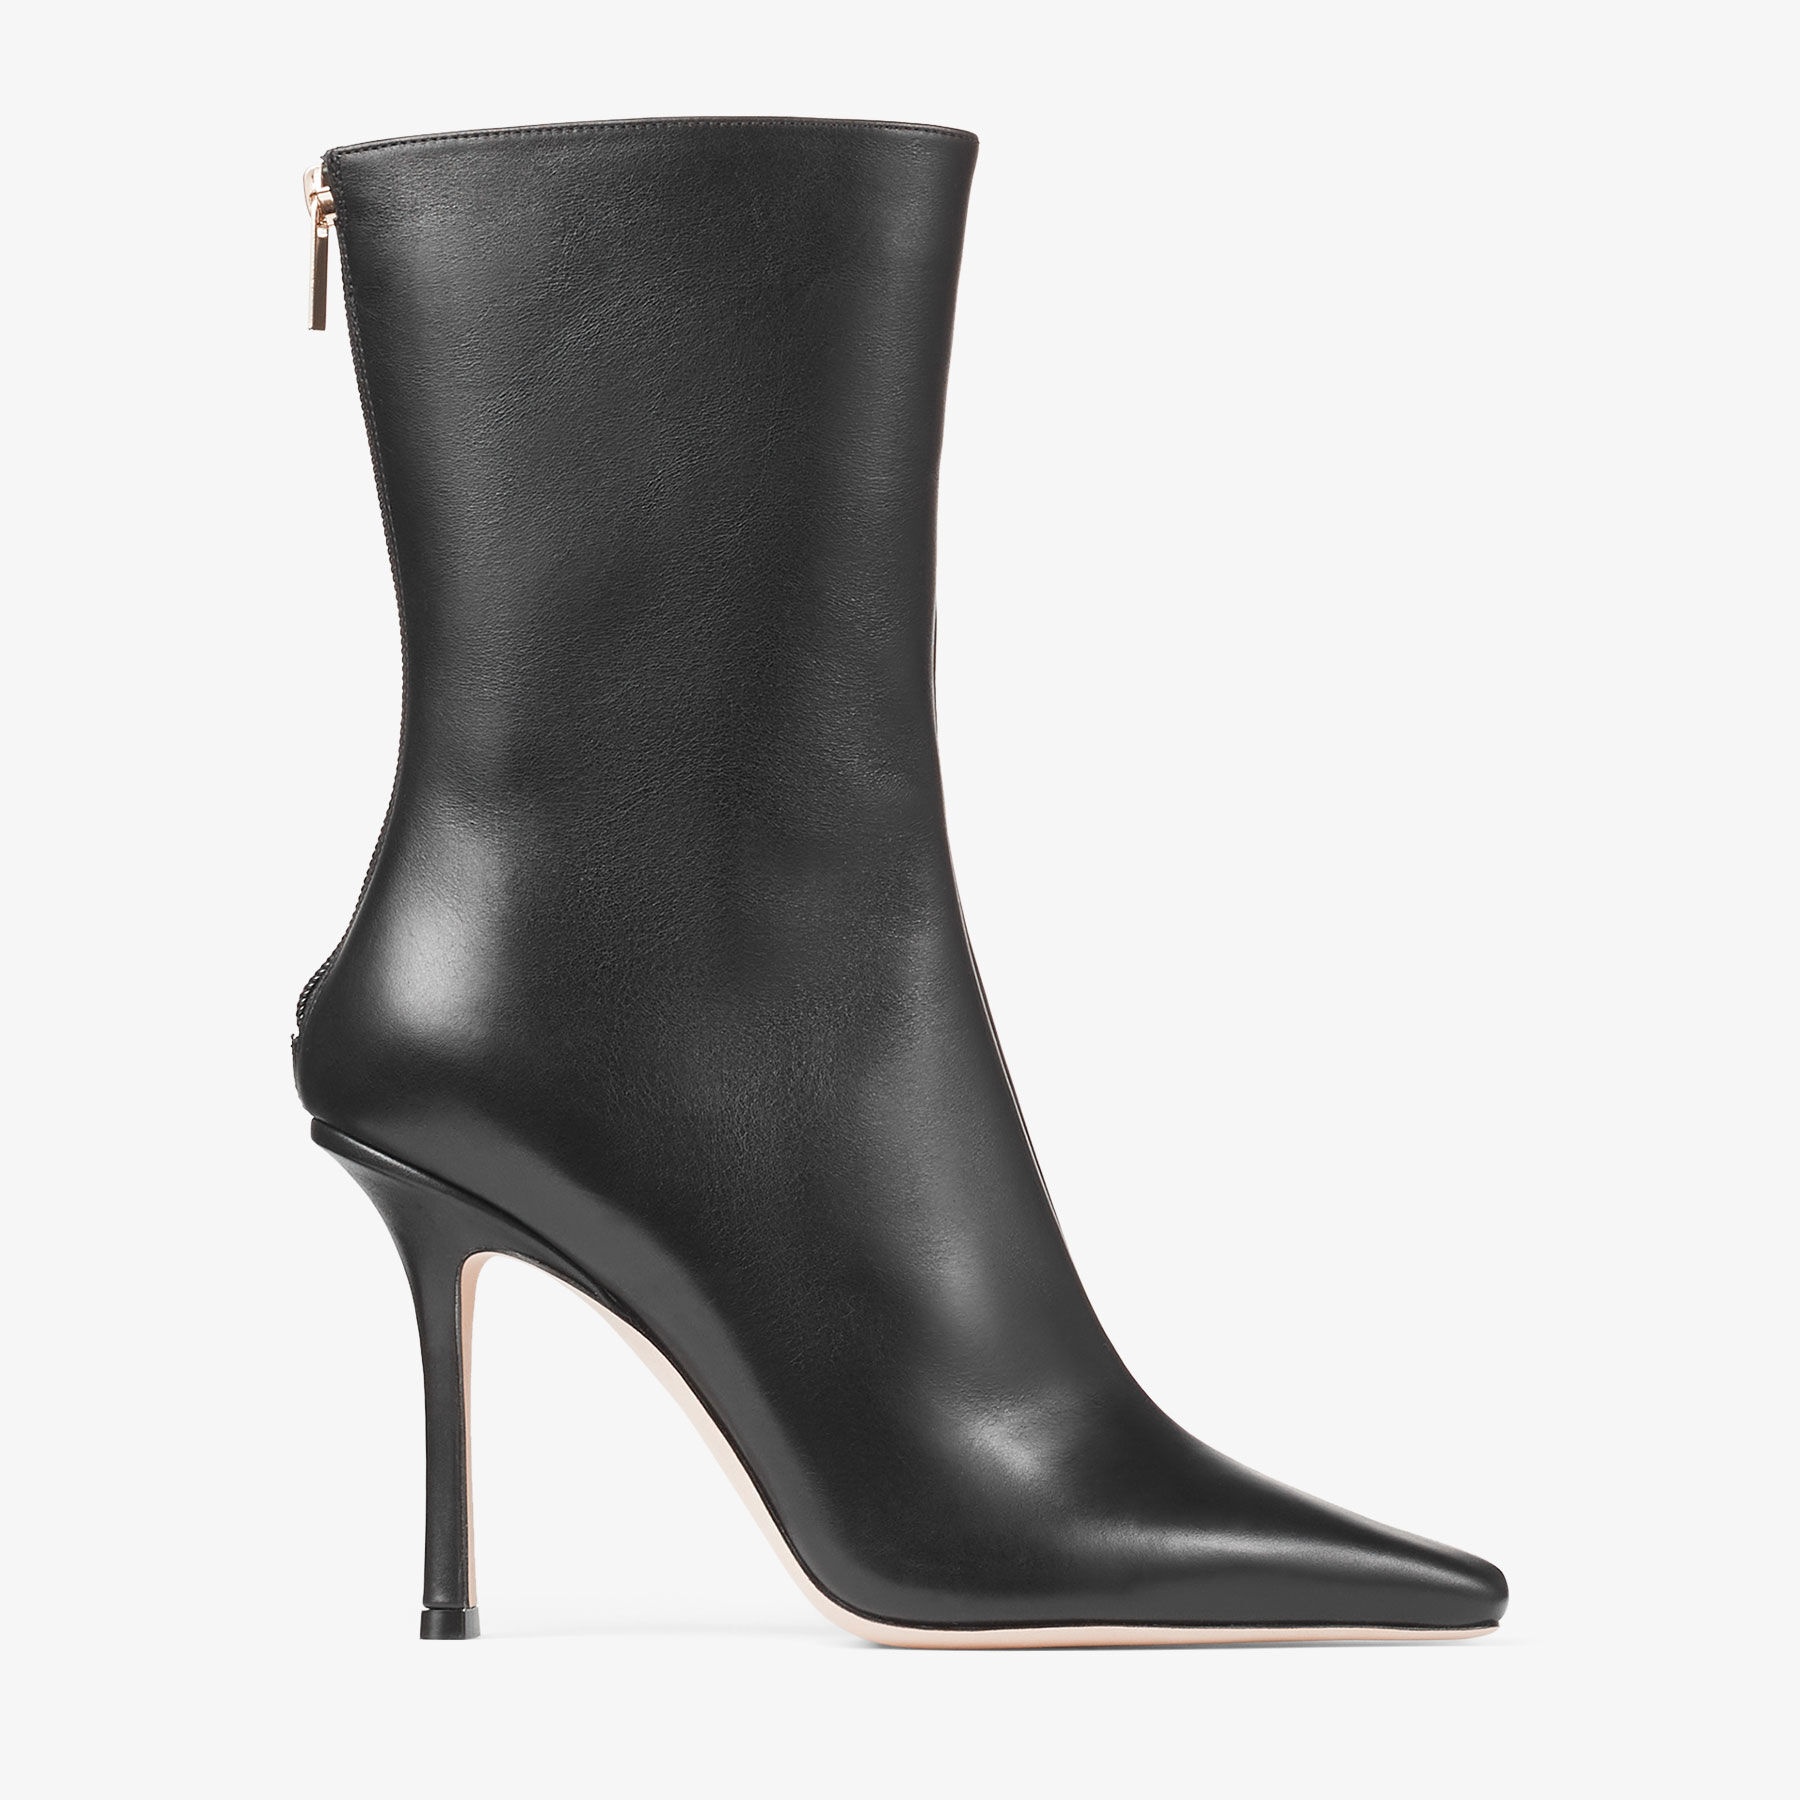 Agathe Ankle Boot 100
Black Calf Leather Ankle Boots - 1